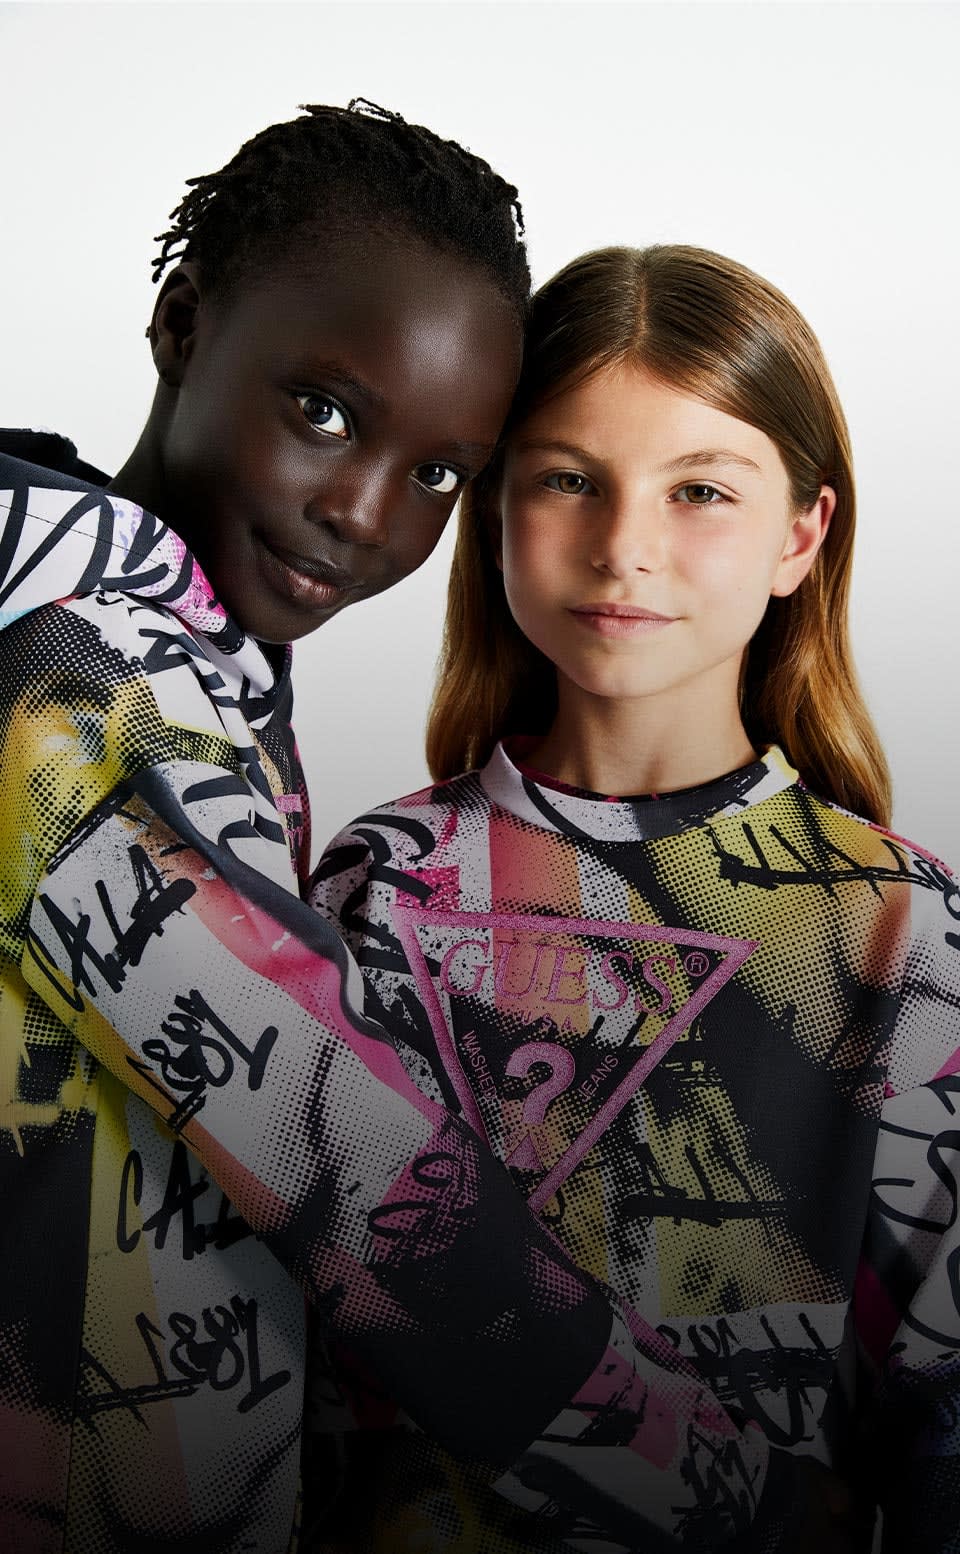 guess kids eu, amazing sale Save 56% available - www.inidesignstudio.com